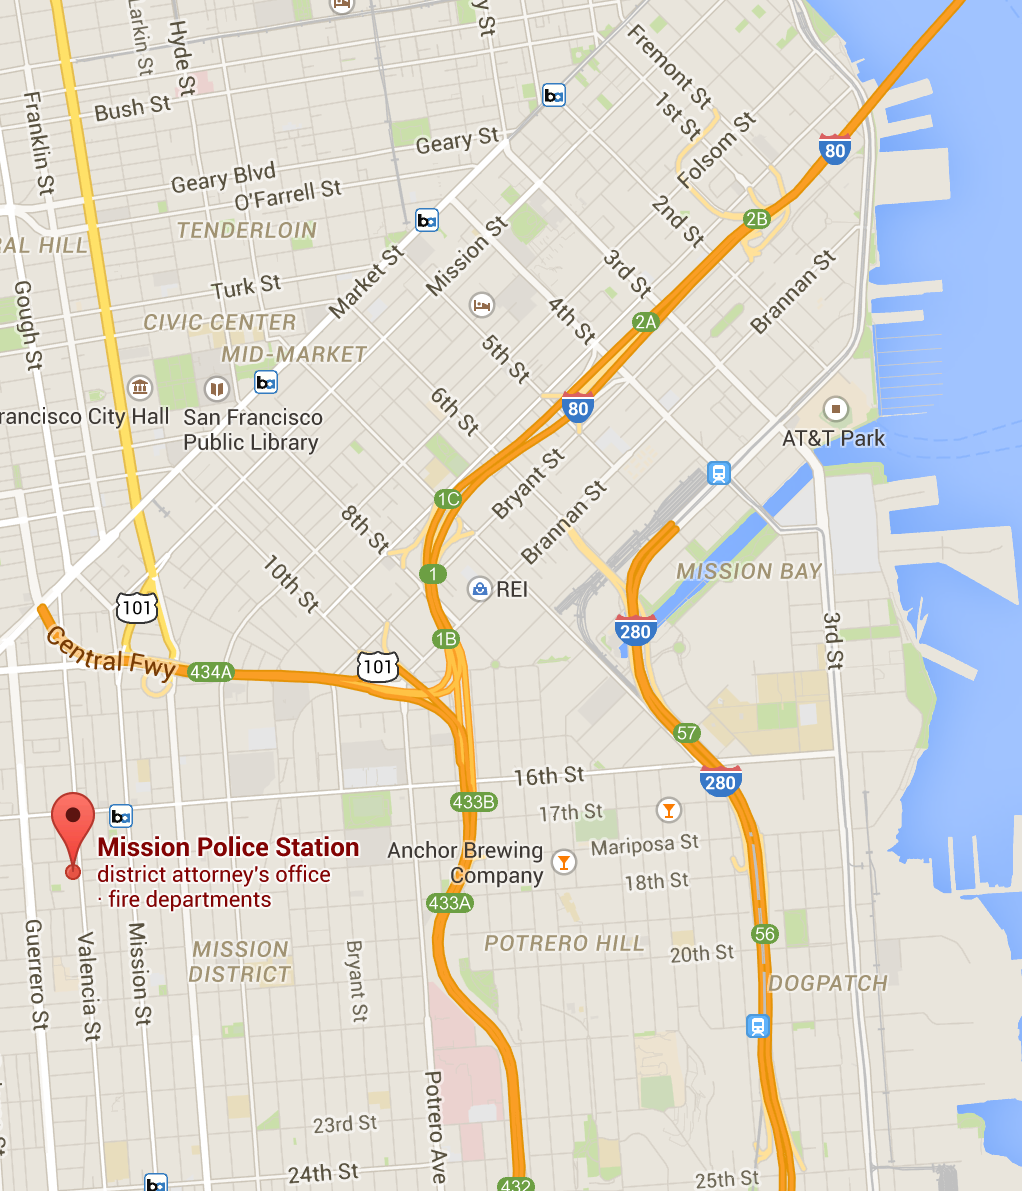 Mission District Police Station-cops shot at by thug